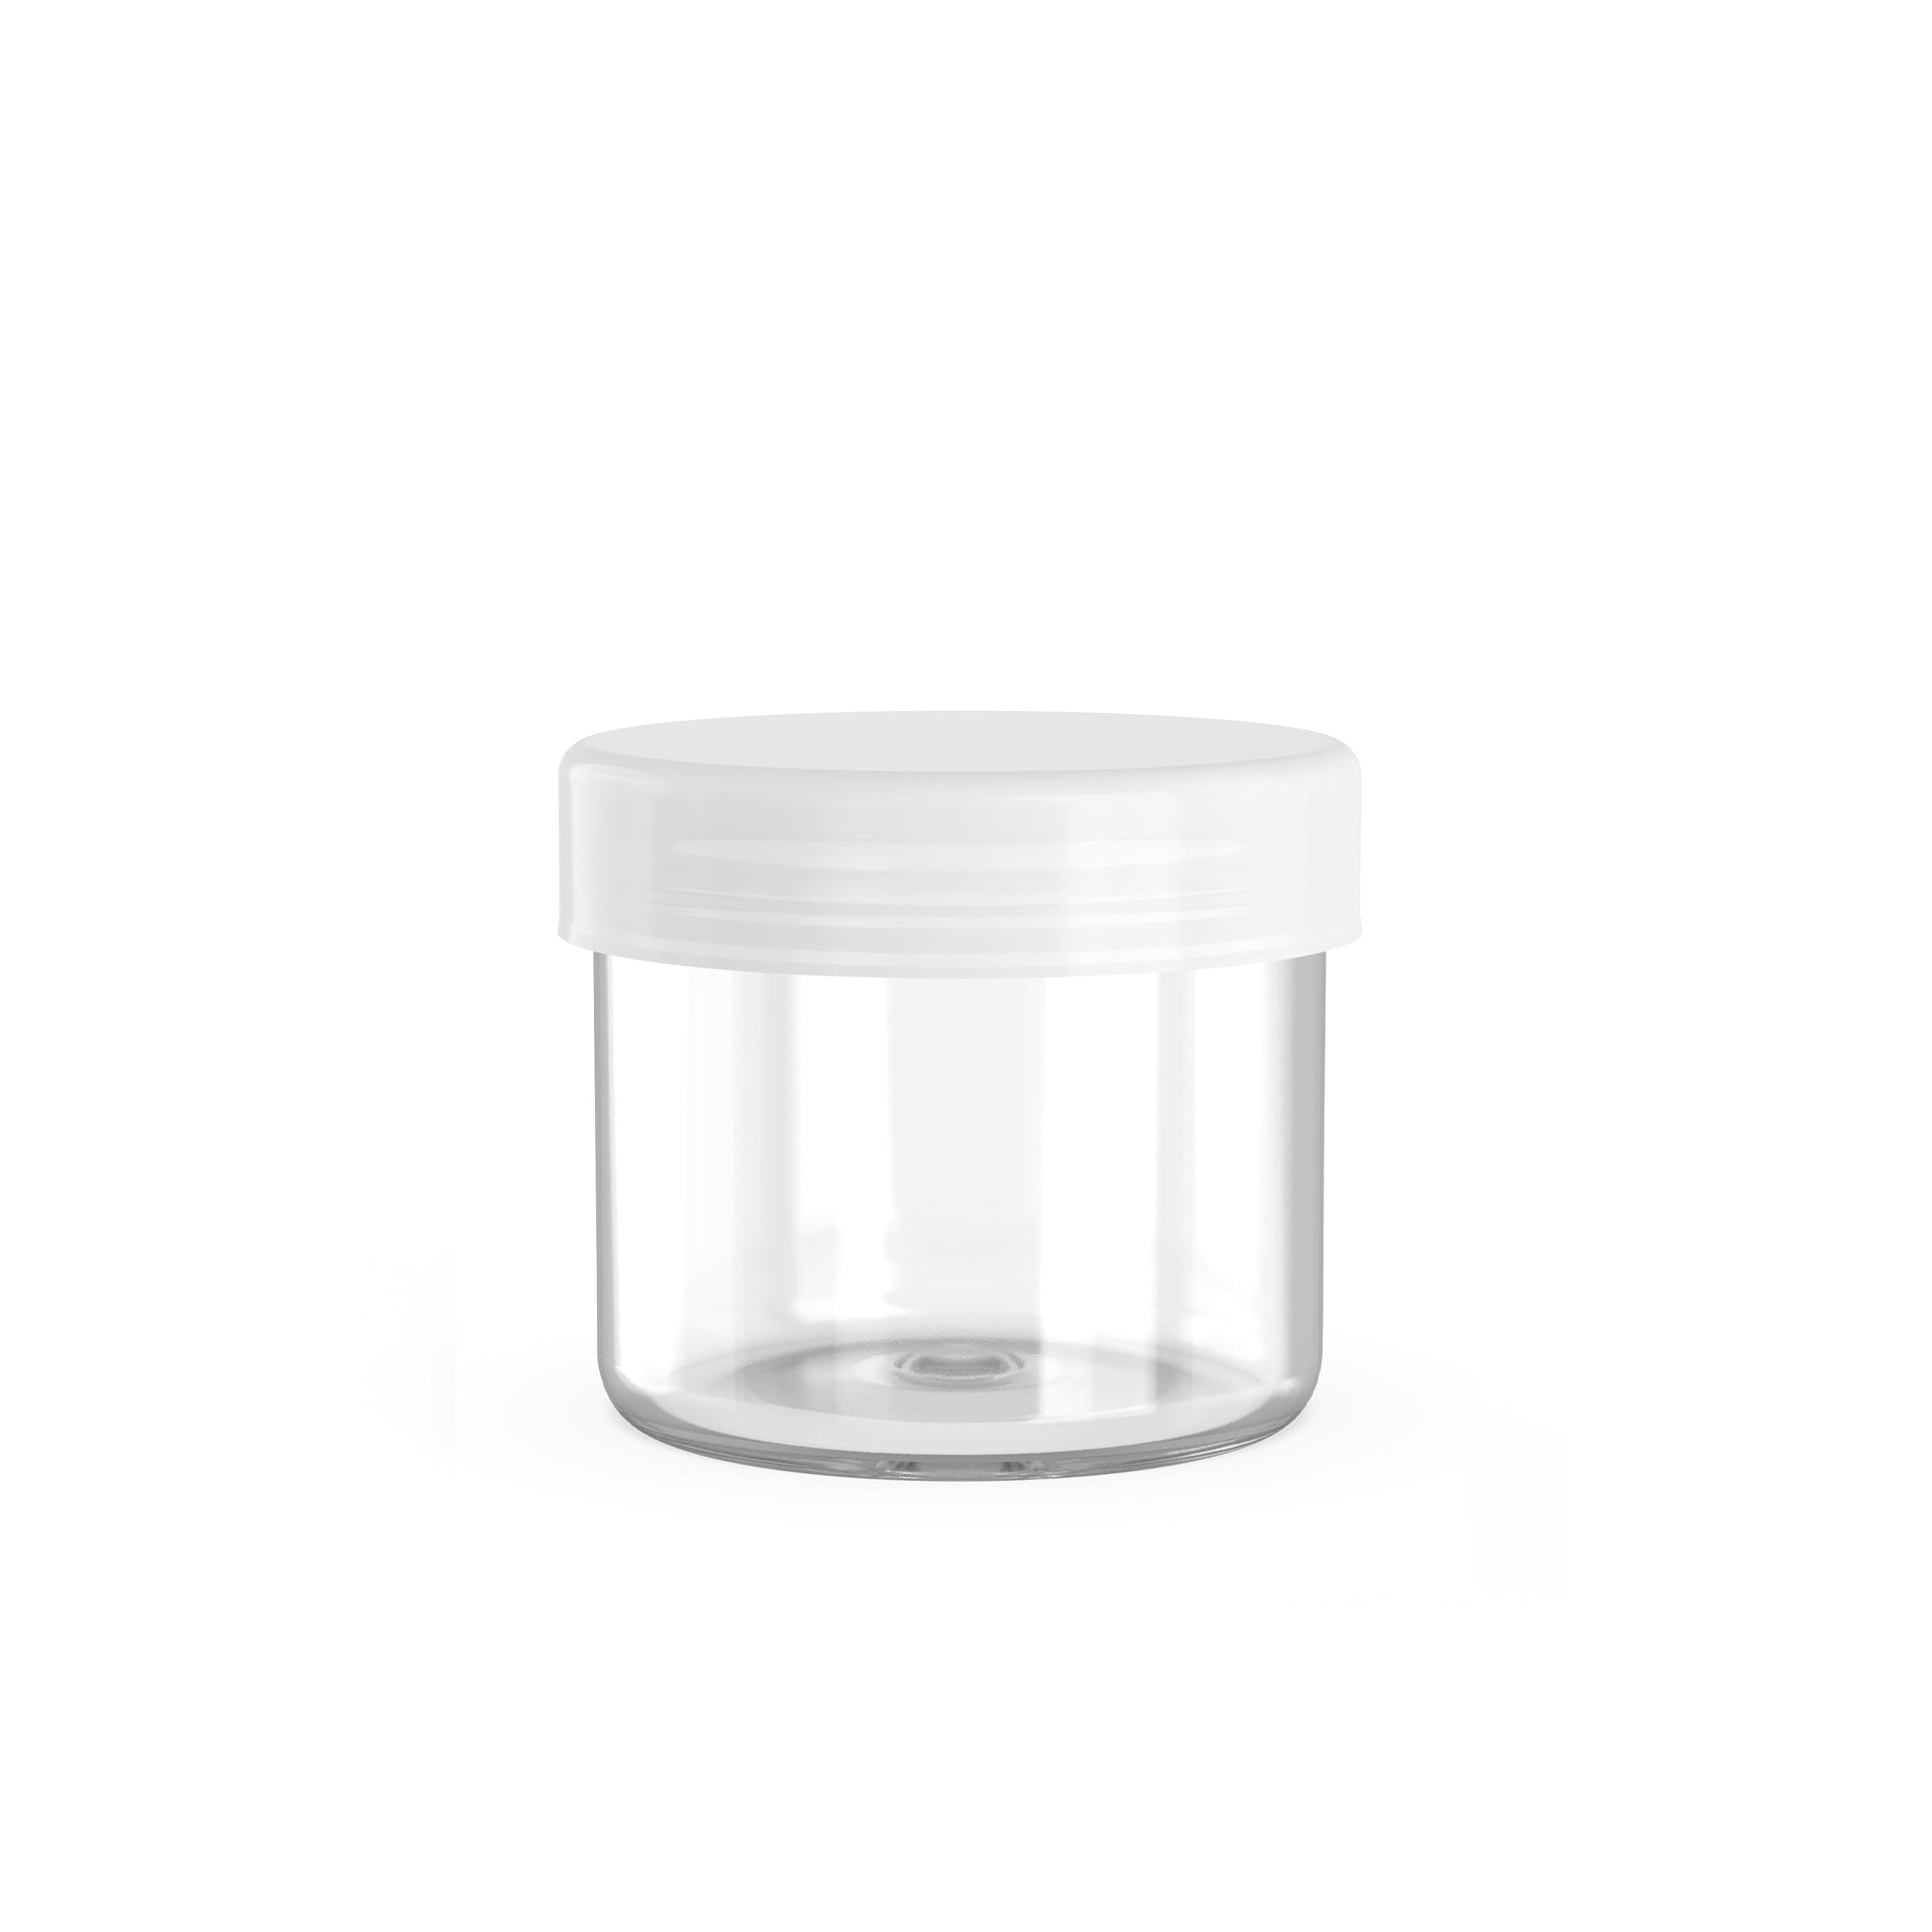 6ml Round Glass Concentrate Jar w/ Silicone Lids - Green Lids